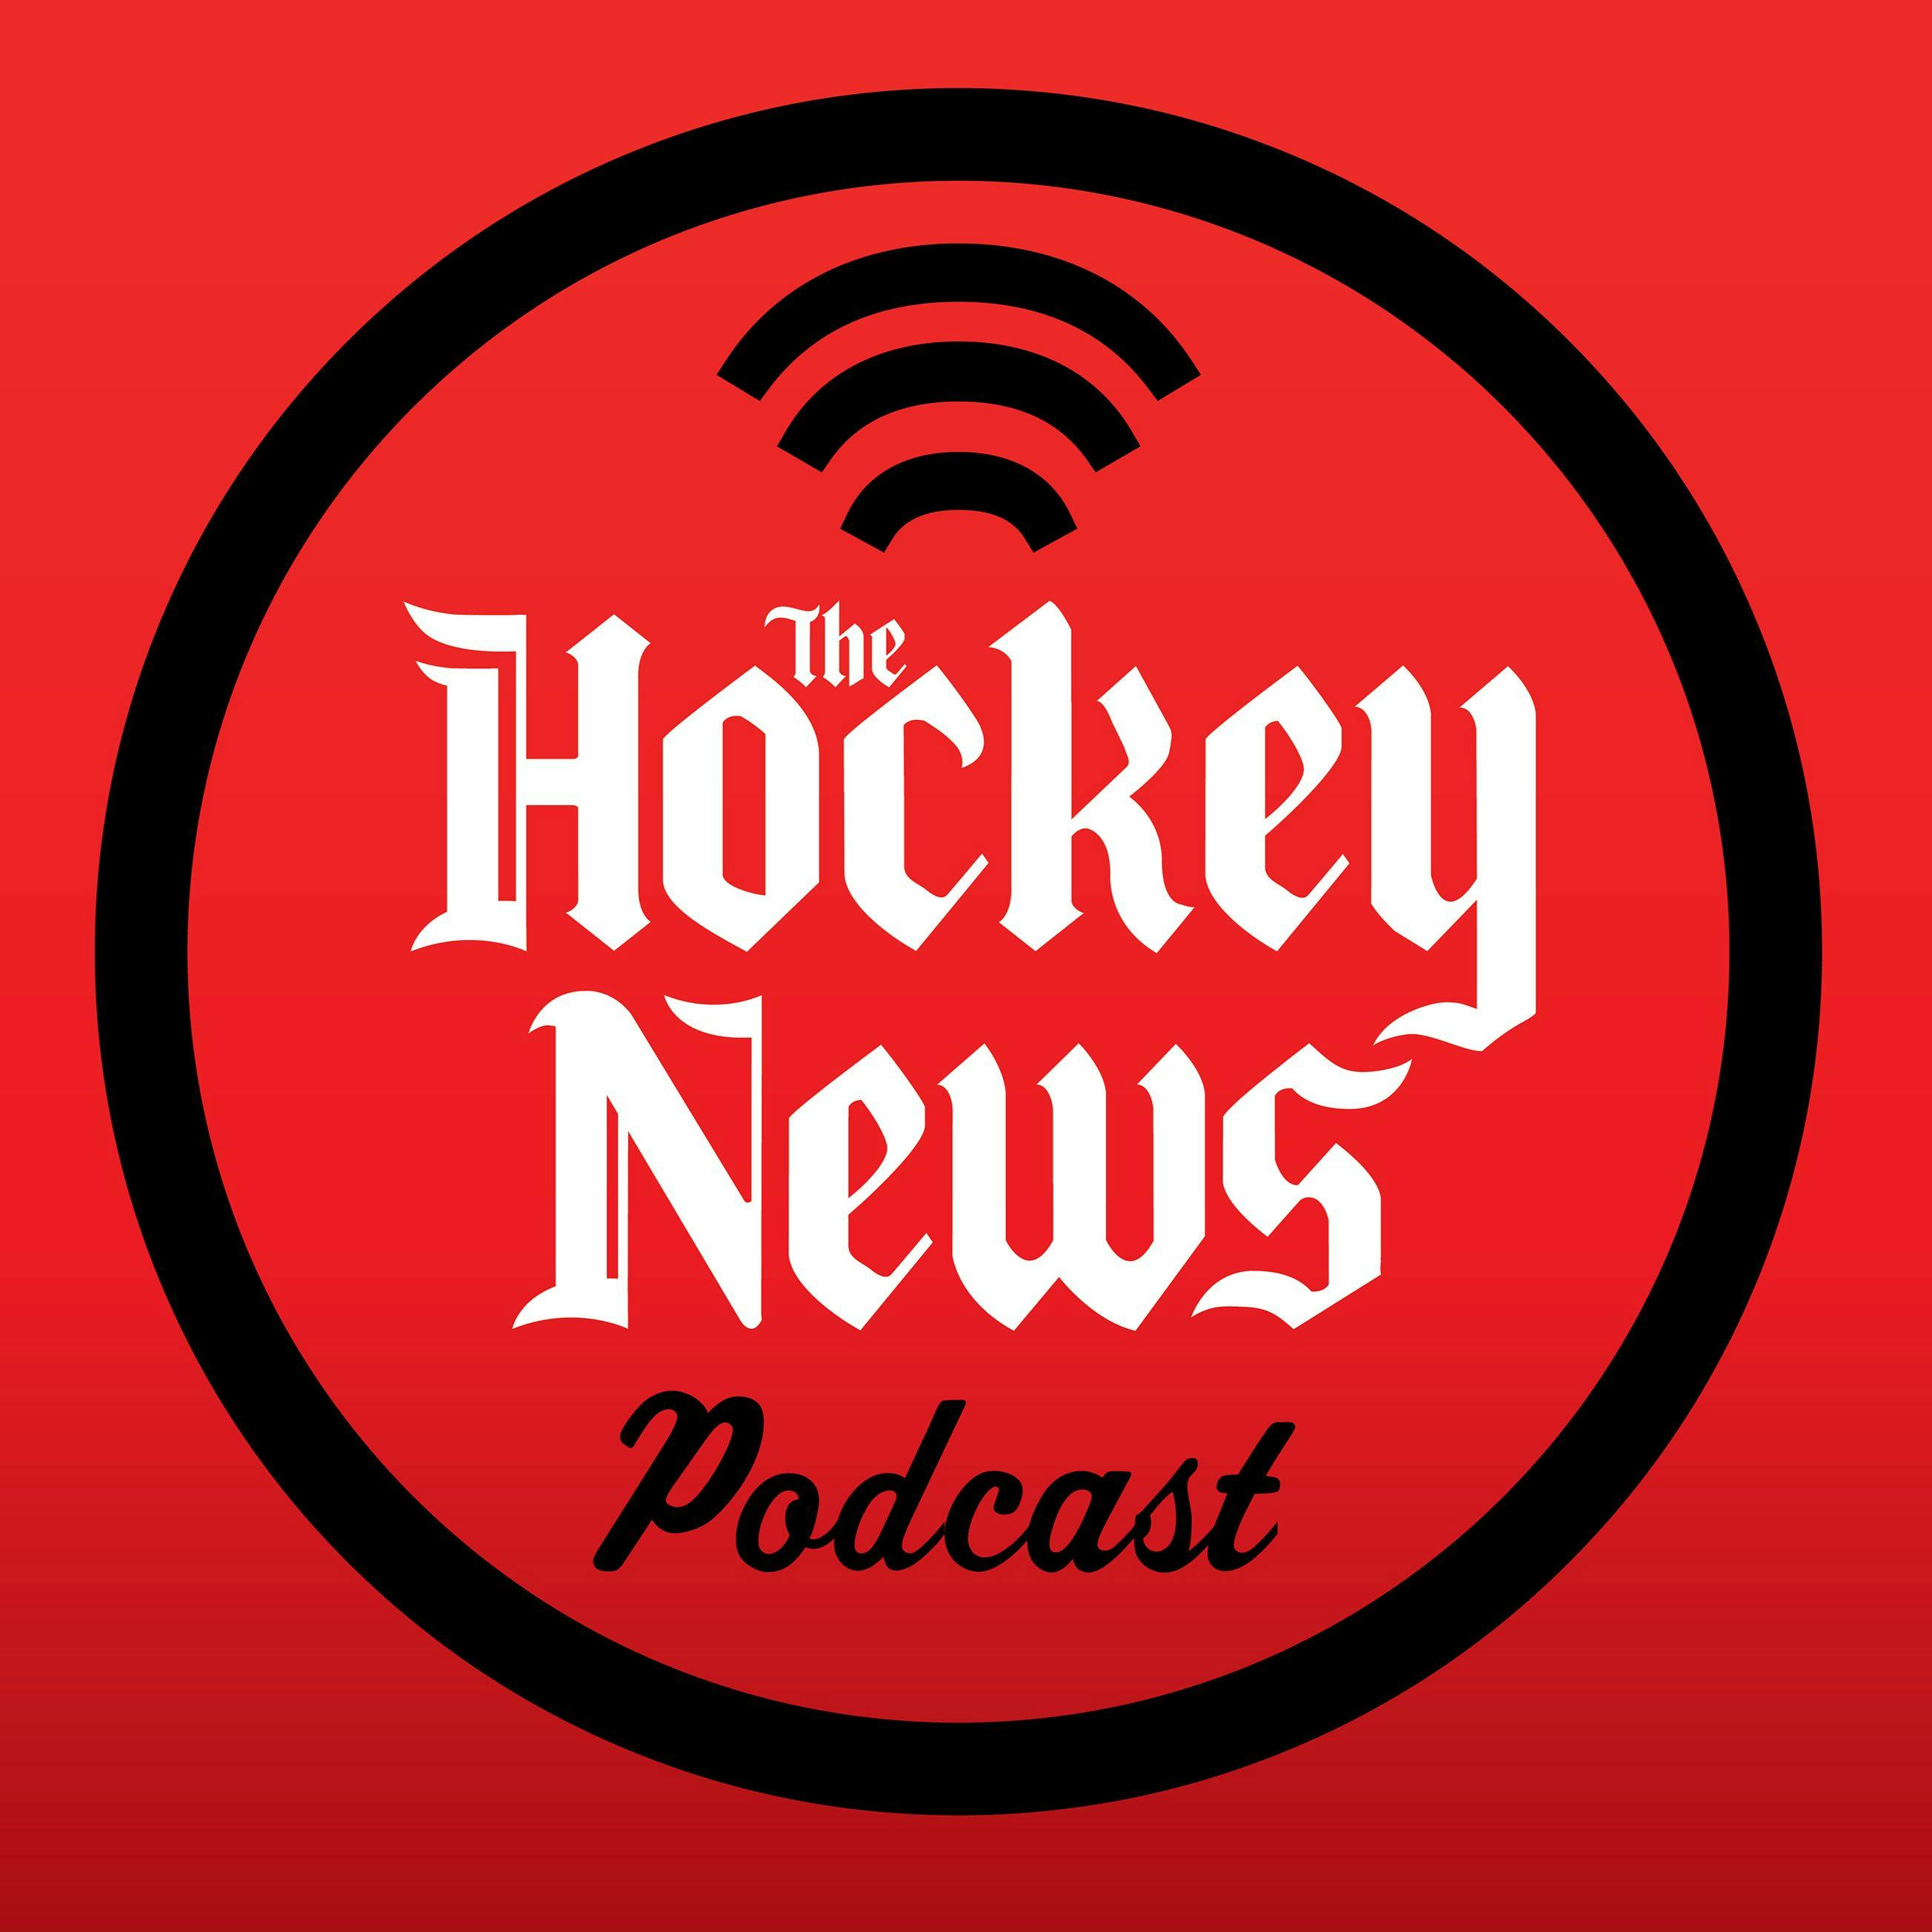 The Hockey News Podcast: The Fallout of the Mitchell Miller Situation